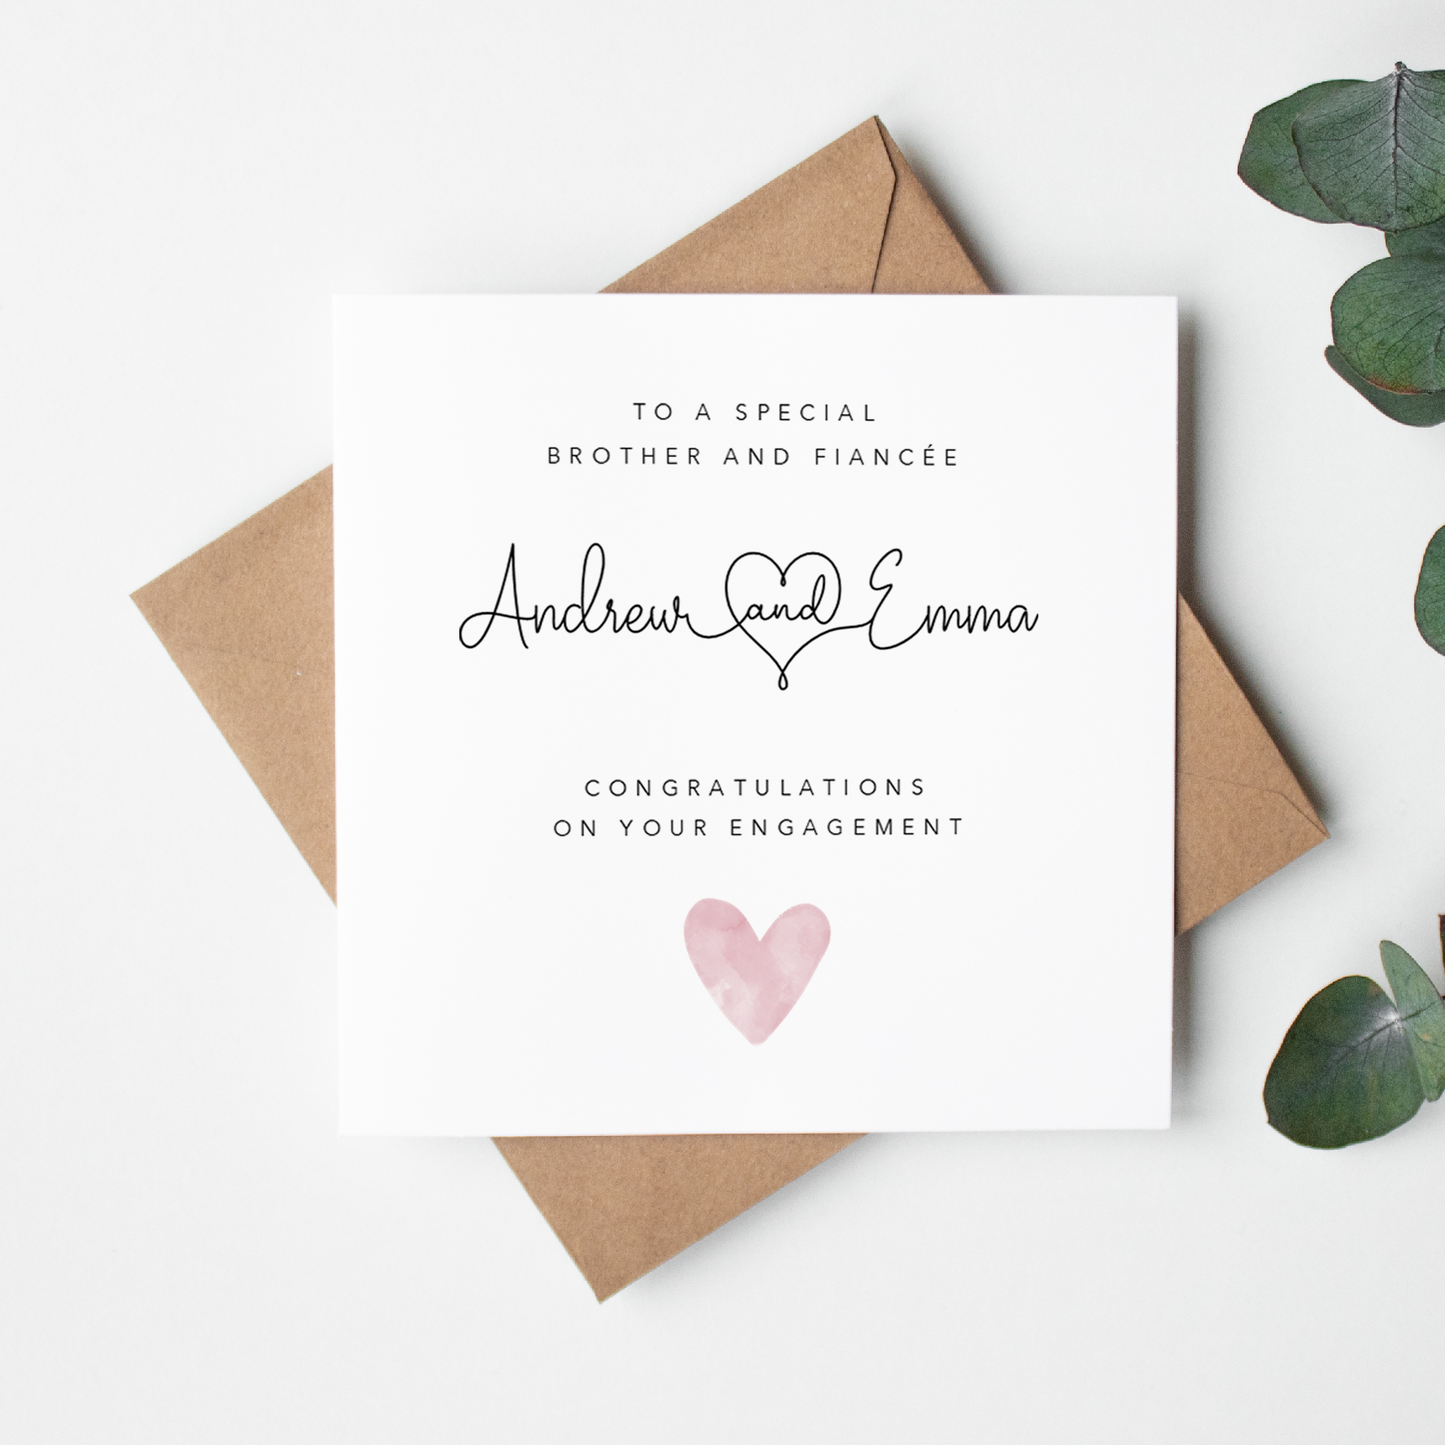 Simple Heart Engagement Card for Brother and Fiancee/Fiance